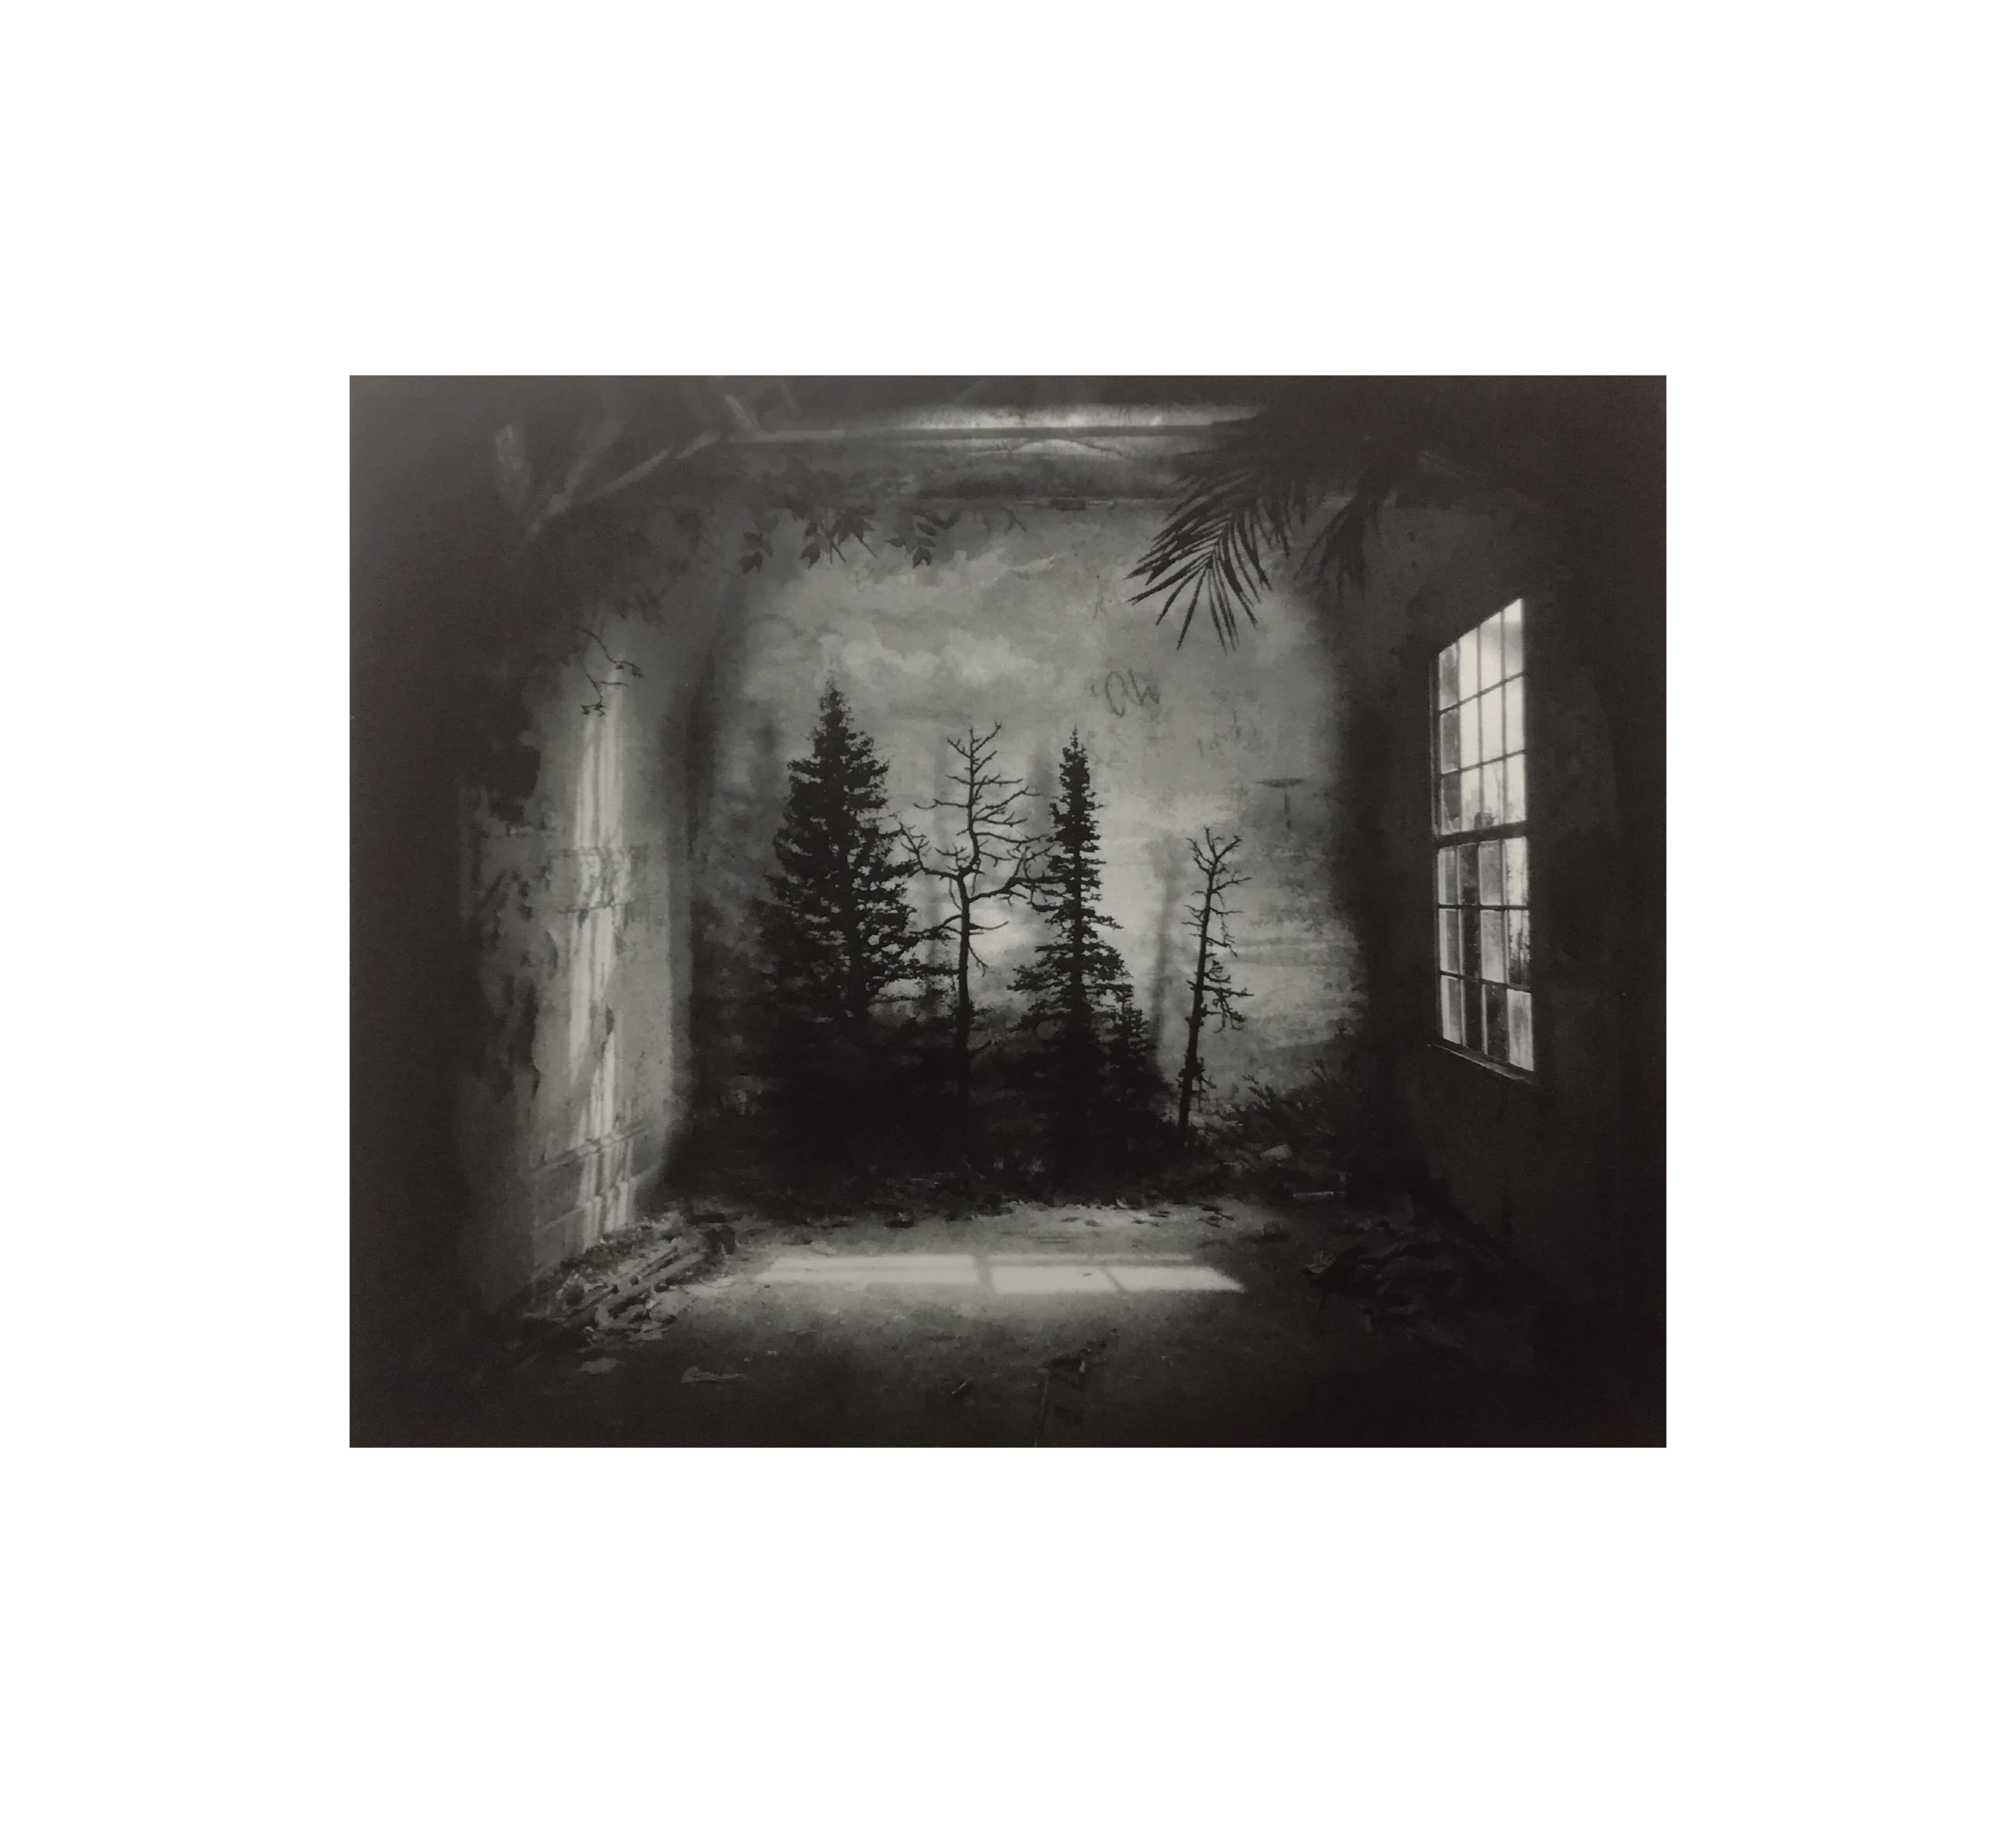 Photopolymer Photogravure Etching on Fine Art paper. Interior Photography, Romantic, Abandoned place, Nature, Trees
Work Title : "Room with Pines"
Artist : Suzanne Moxhay
The work is signed and numbered, delivred with certificate of authenticity